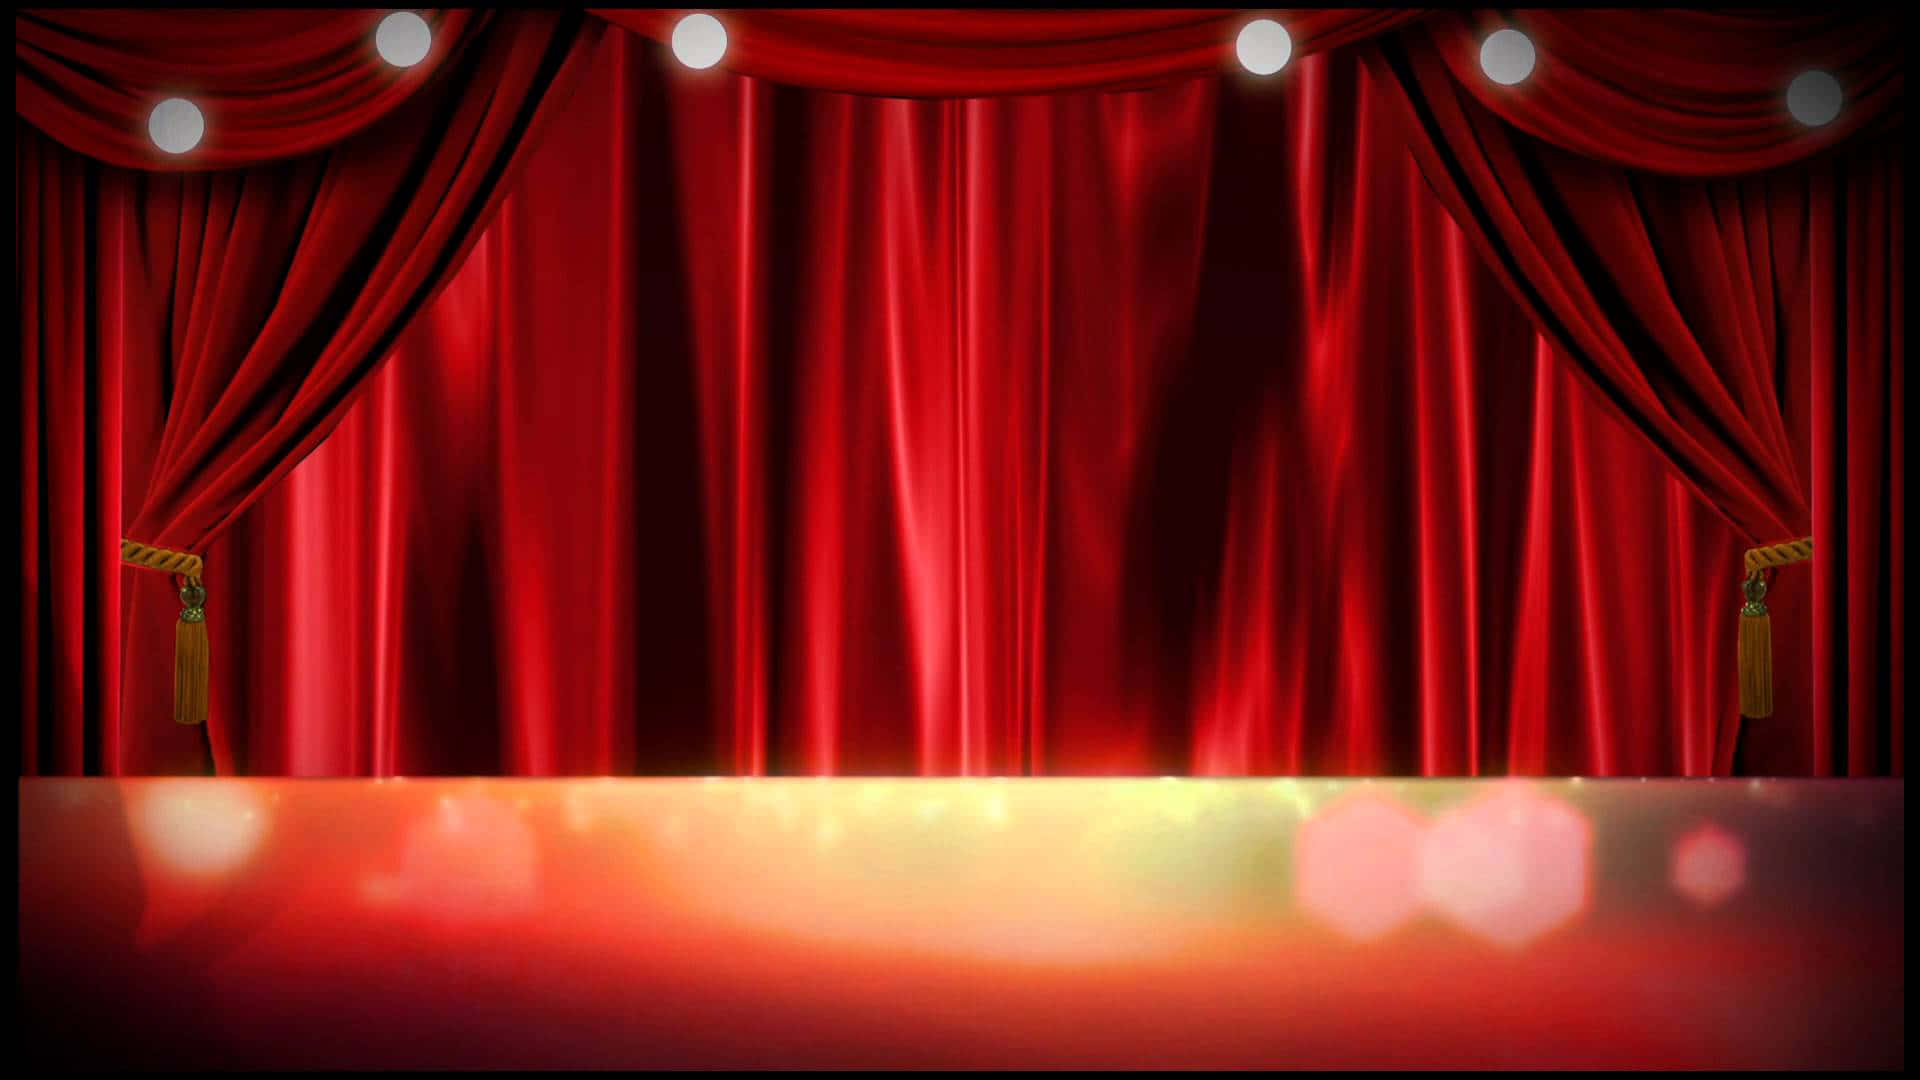 Aurora-like backdrop created with red and navy curtains